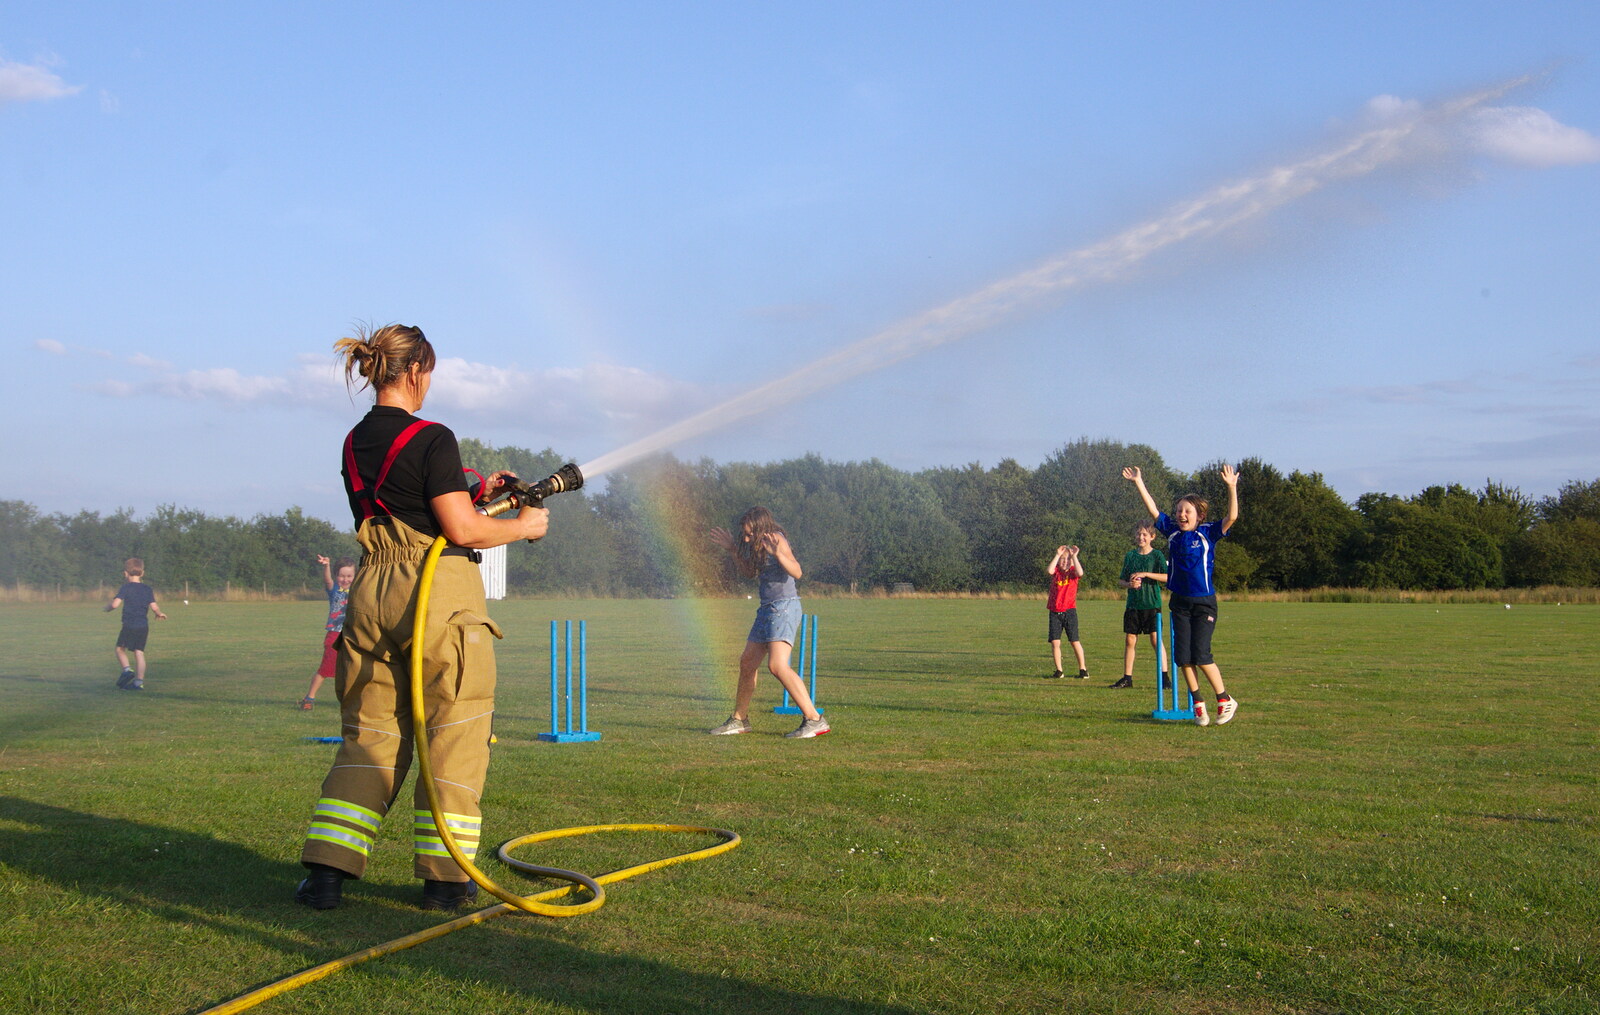 Oak leaps about from A Water Fight with a Fire Engine, Eye Cricket Club, Suffolk - 5th August 2019